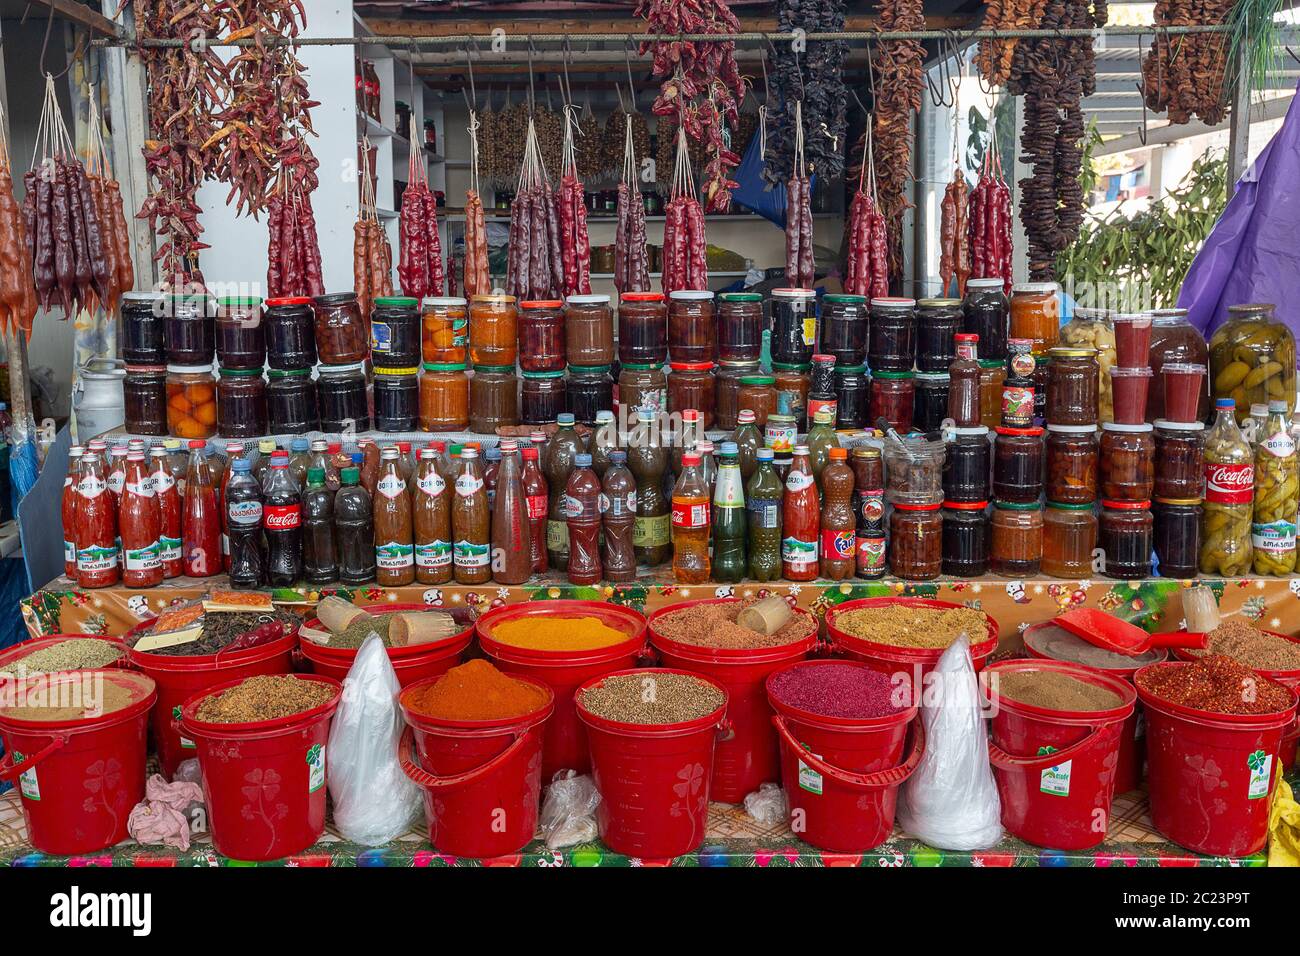 Different spices, dried food and jams in jars in the bazaar known as deserters bazaar, in Tbilisi, Georgia Stock Photo